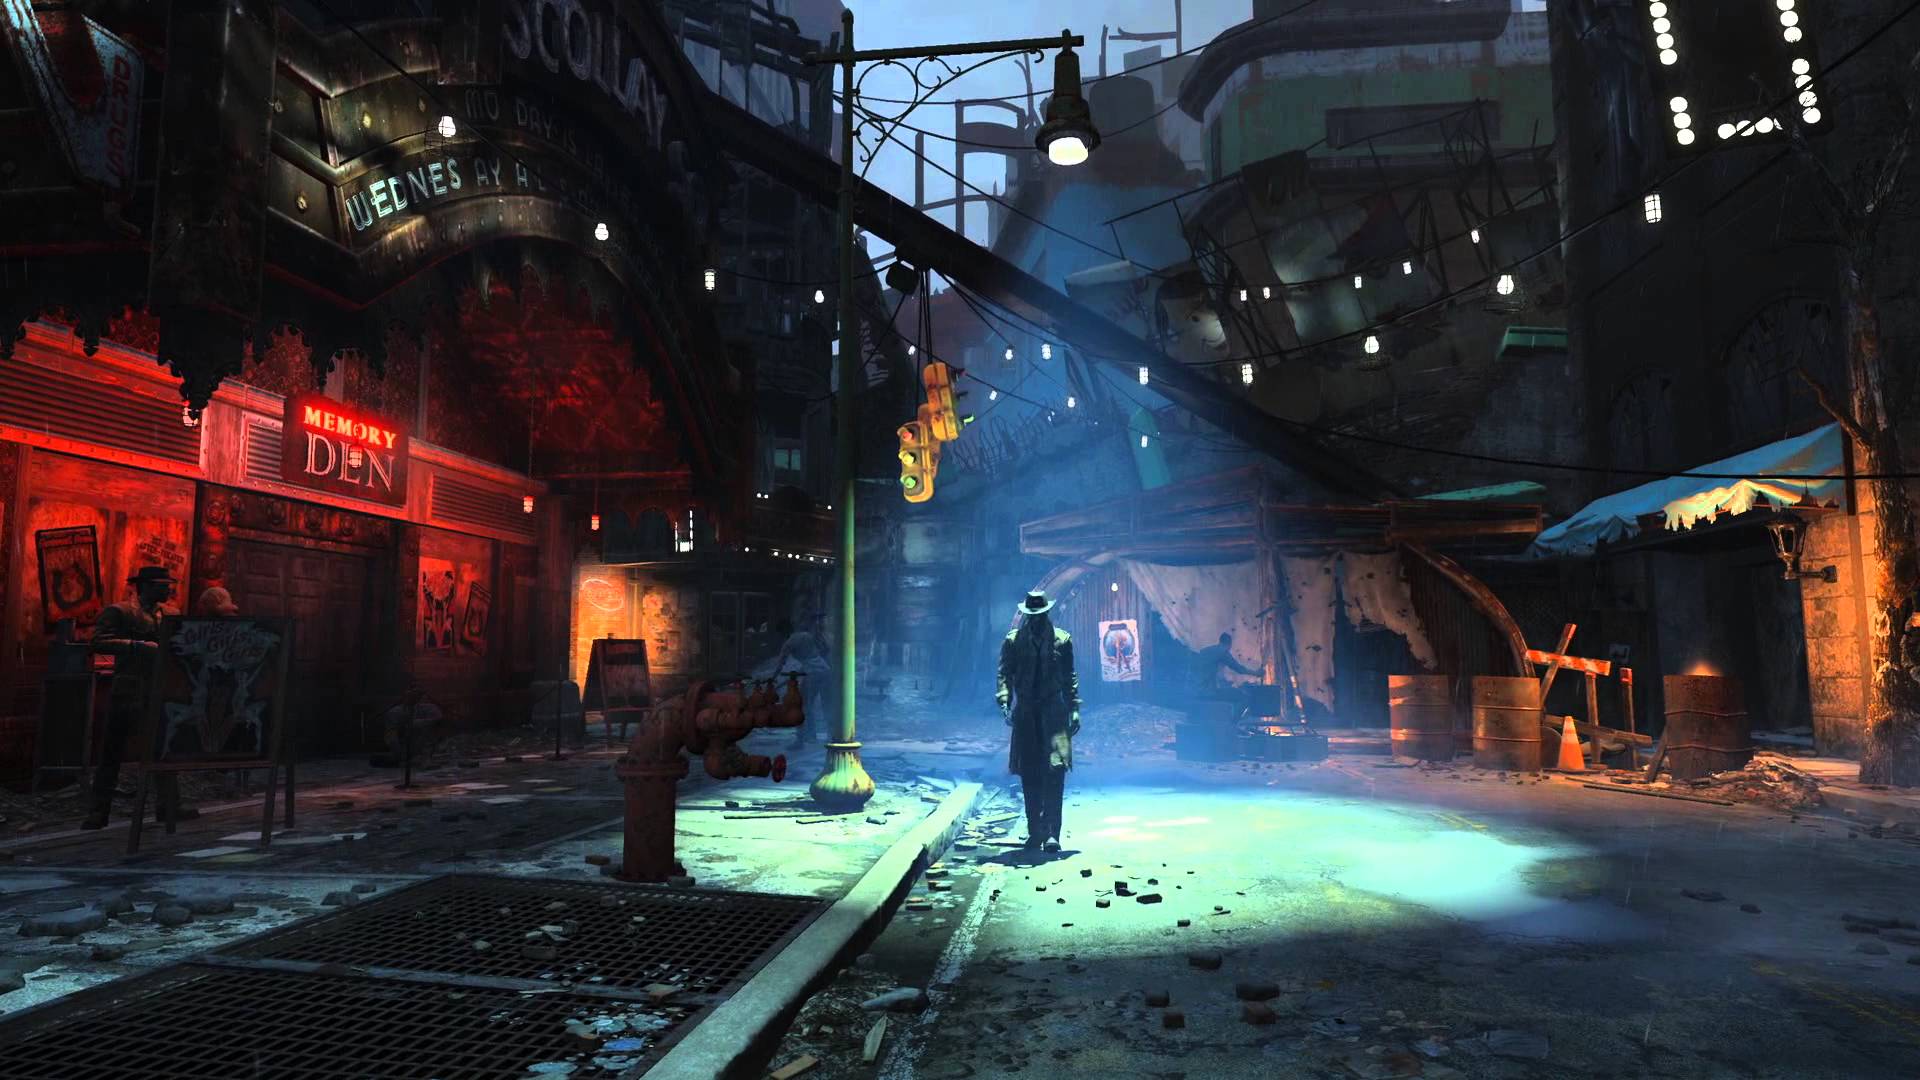 Fallout 4 is Officially Revealed for PC, Playstation 4, and Xbox One [UPDATE]